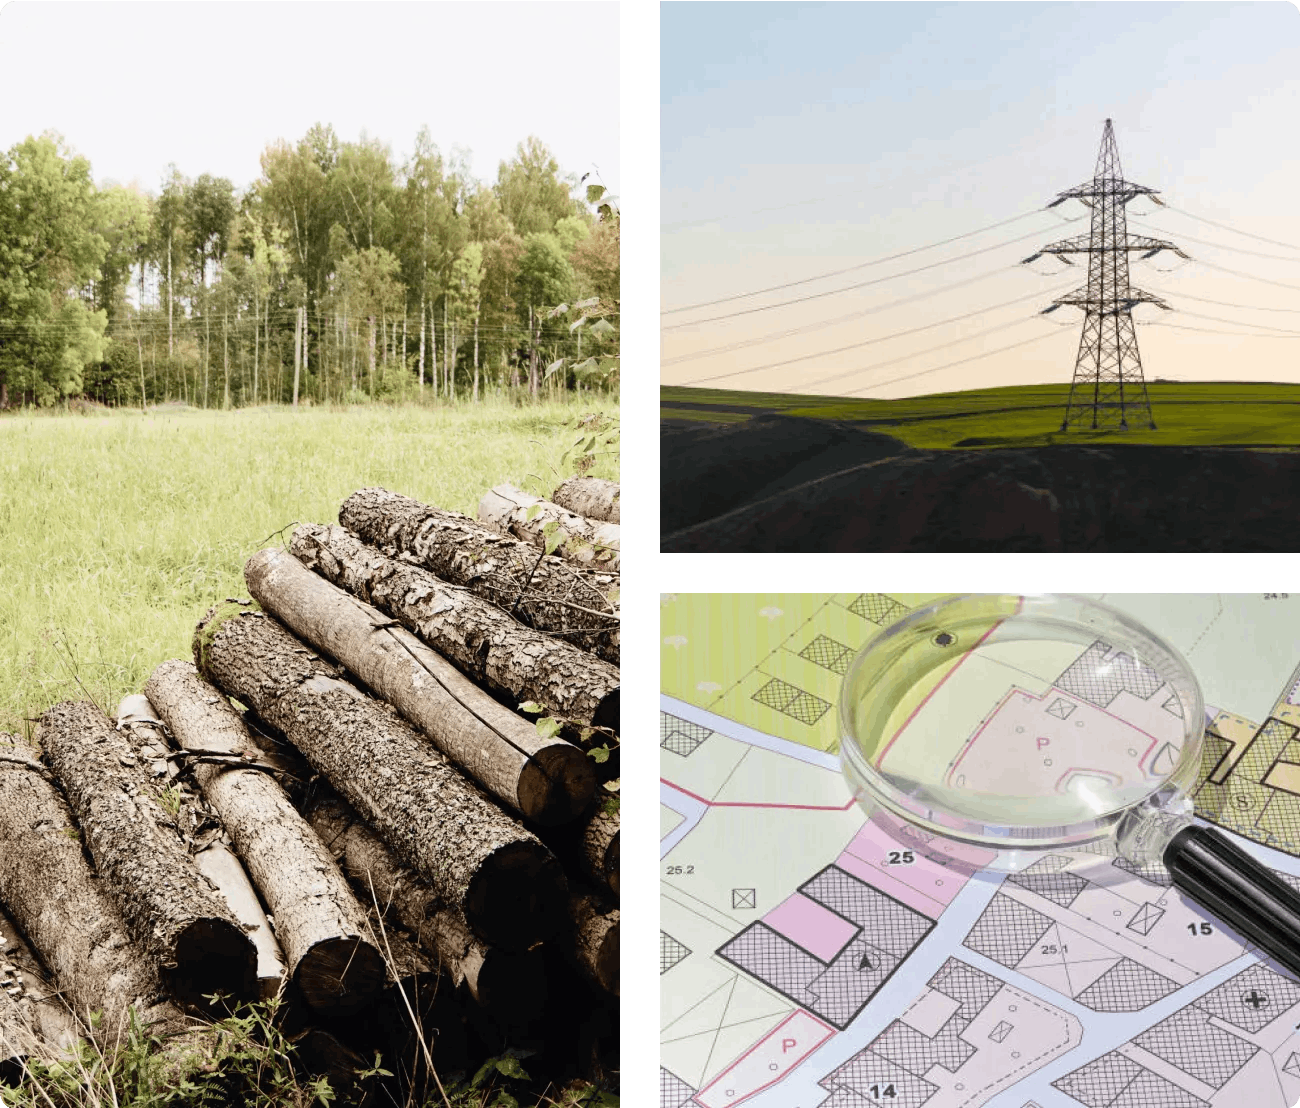 Images of deforestation, utilities and zoning regulations